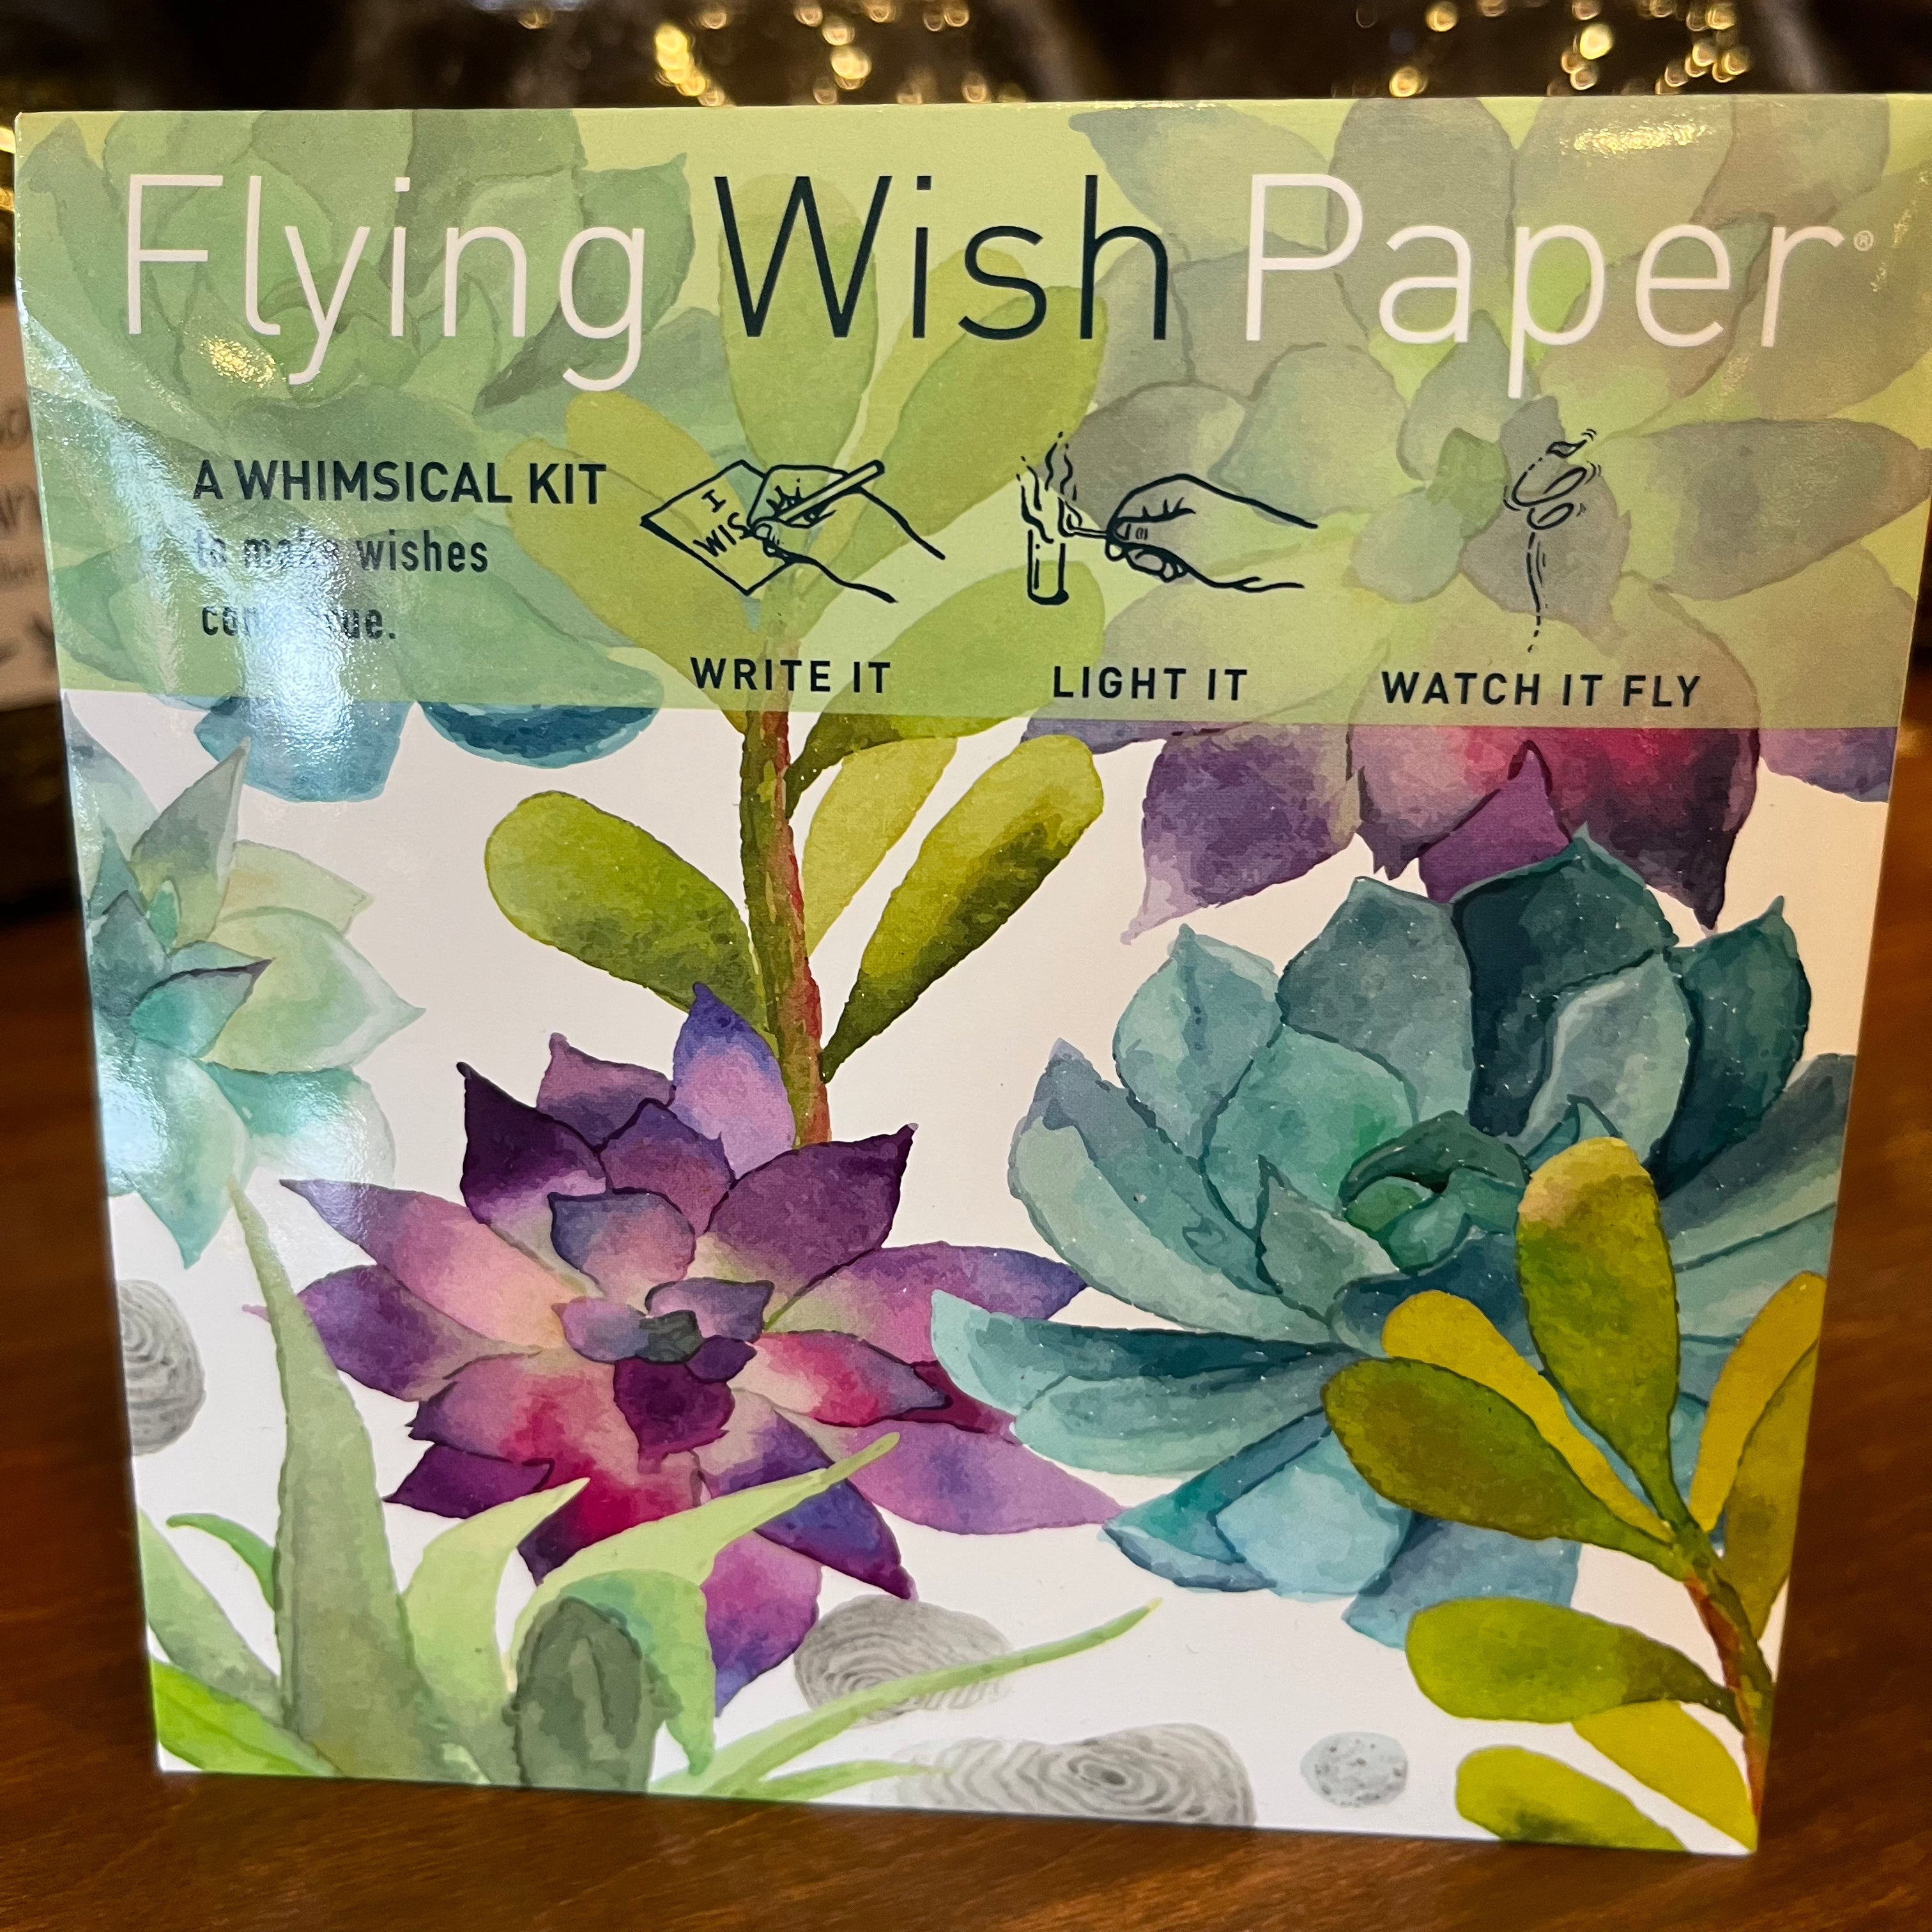 Flying Wish PaperWhat is it? 